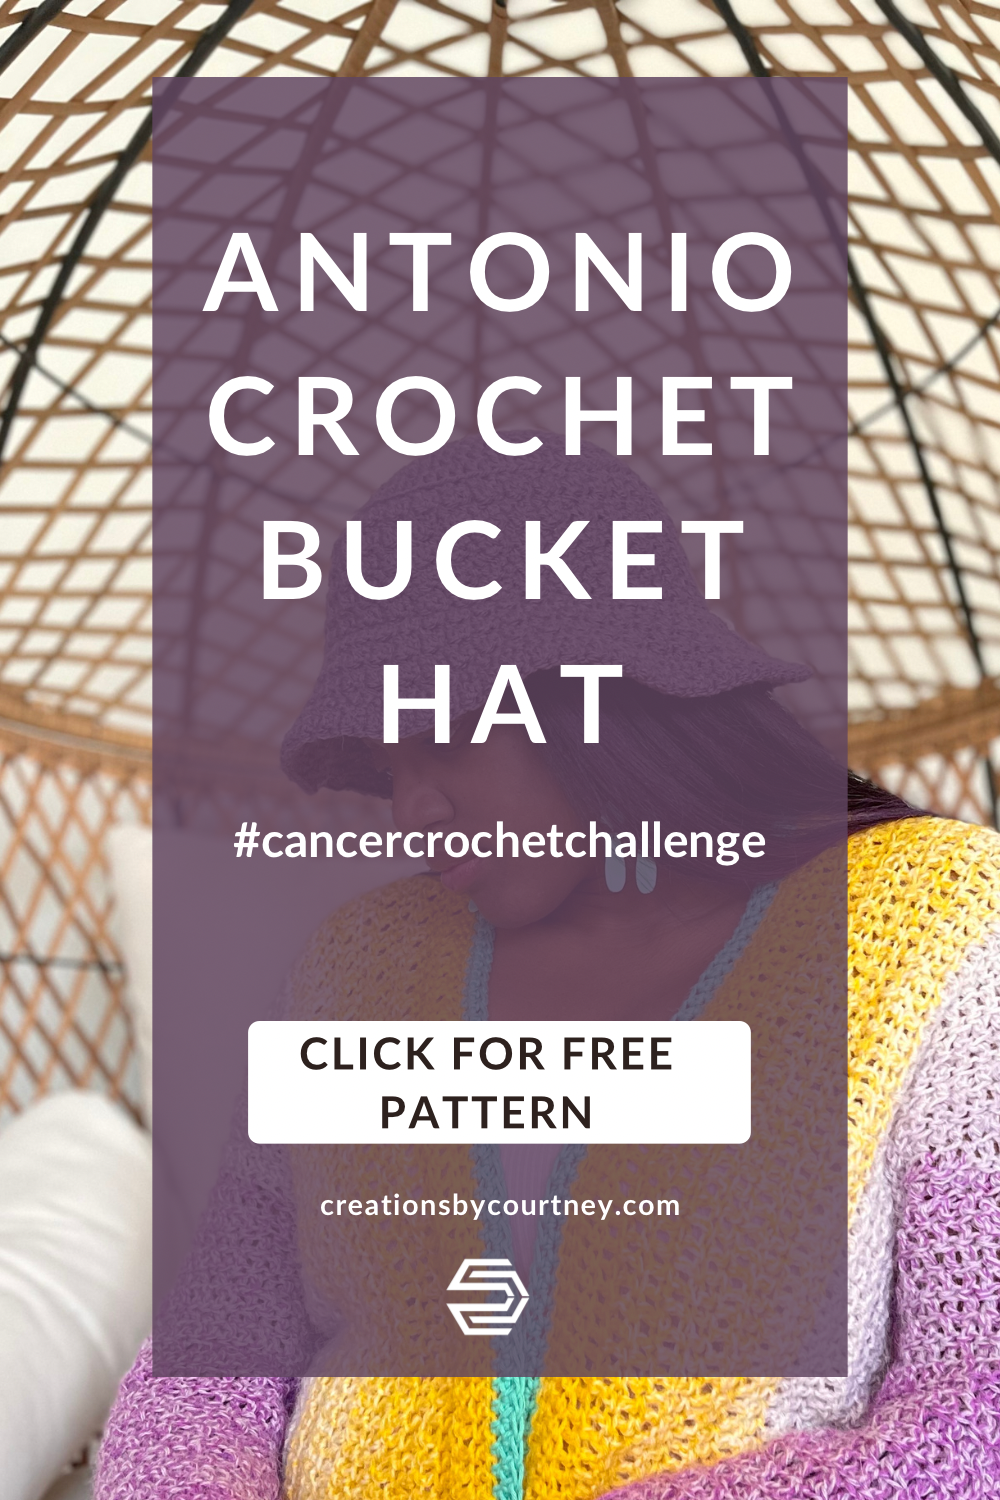 Follow this free pattern to make a crochet bucket hat with subtle texture from just two stitches. Learn about the inspiration behind this design while learning about cancer. #crochetcancerchallenge